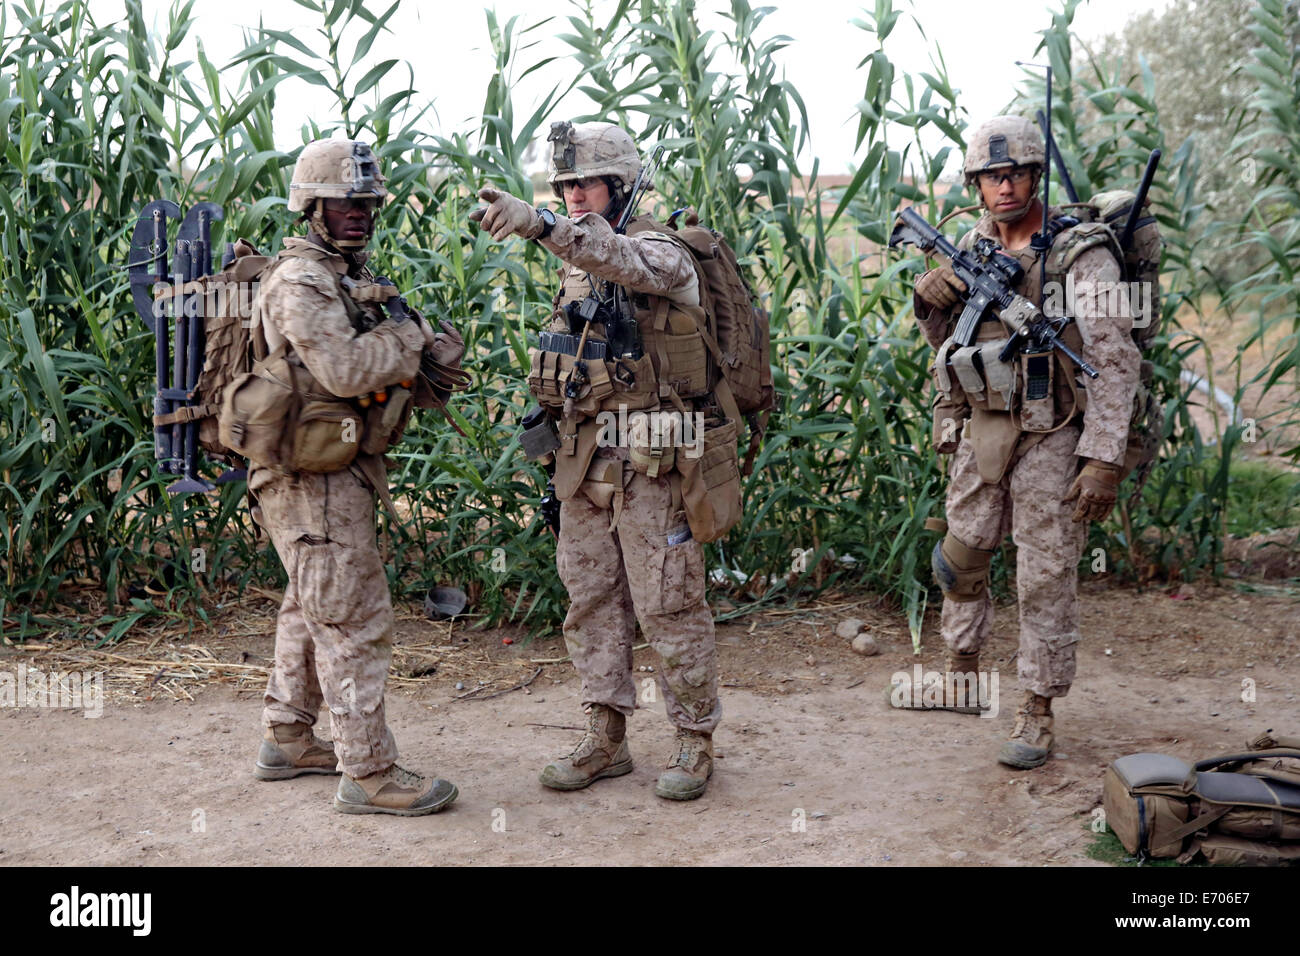 US Marines prepare to spread out during a counter insurgency mission in a village August 16, 2014 in Helmand province, Afghanistan. Stock Photo